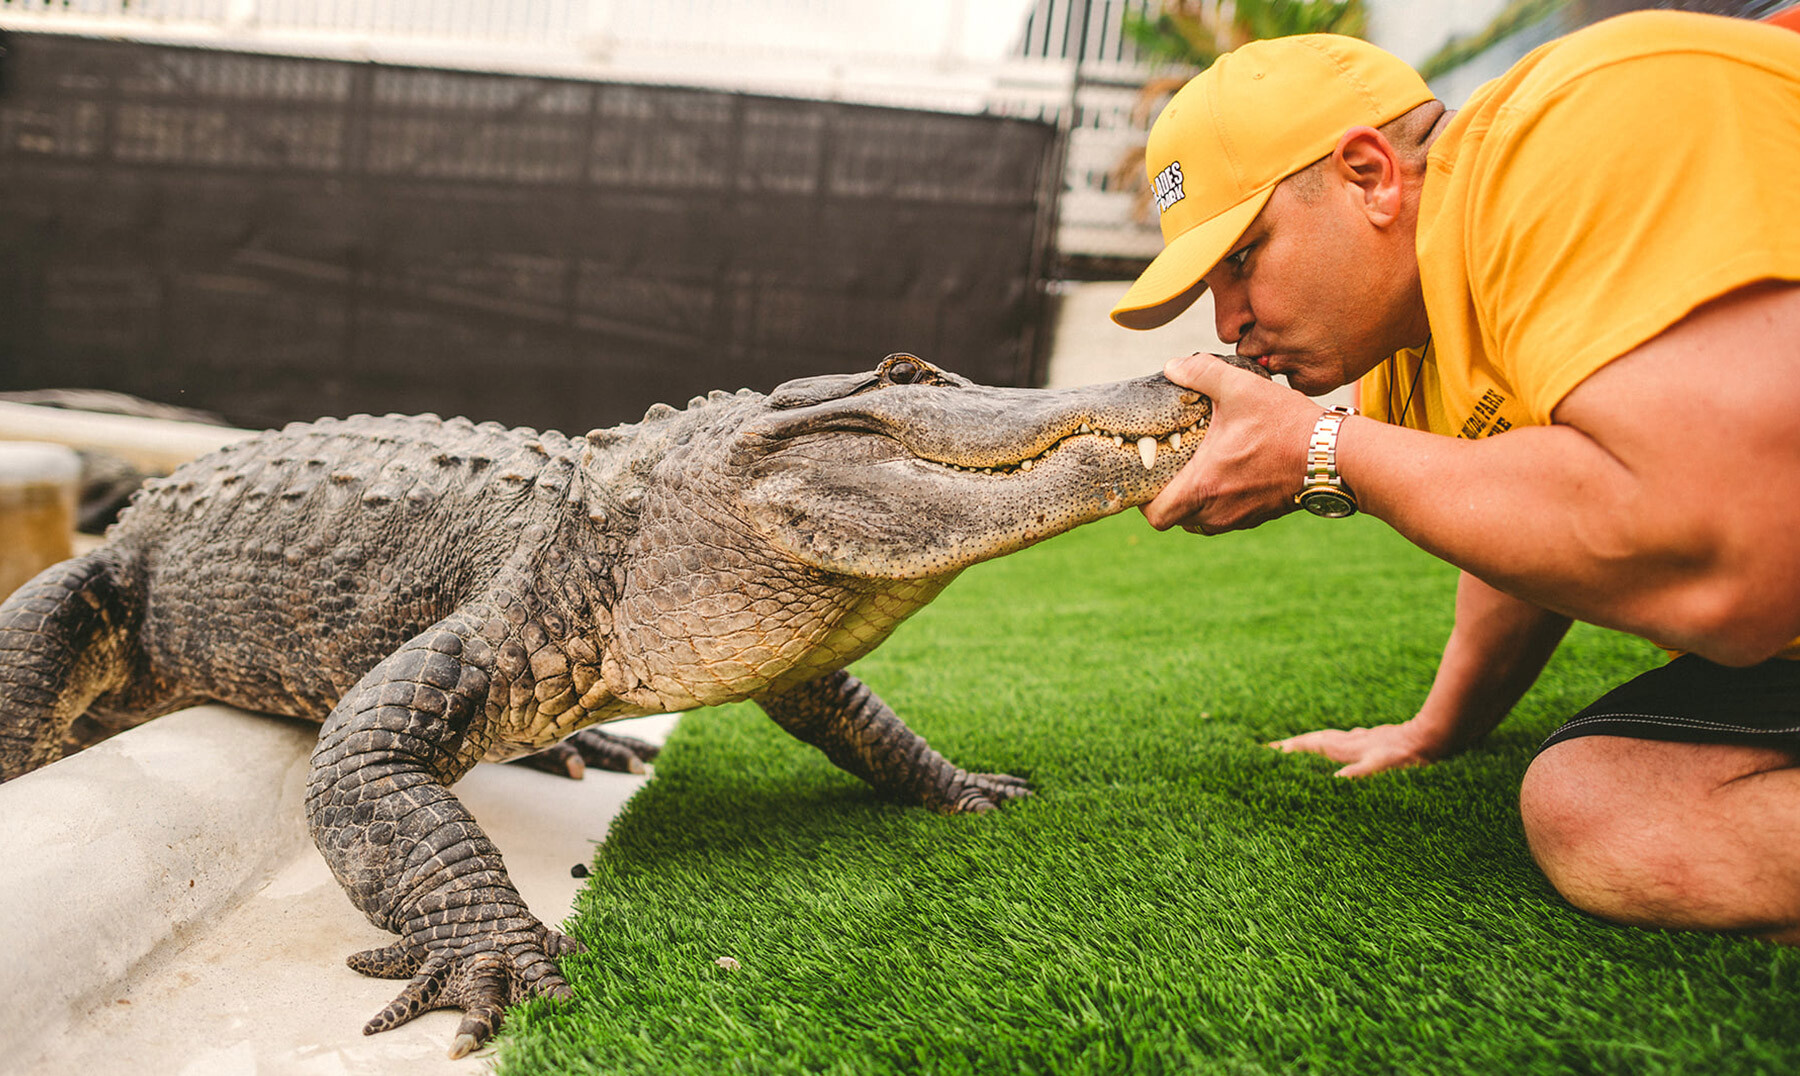 everglades attractions - gator show